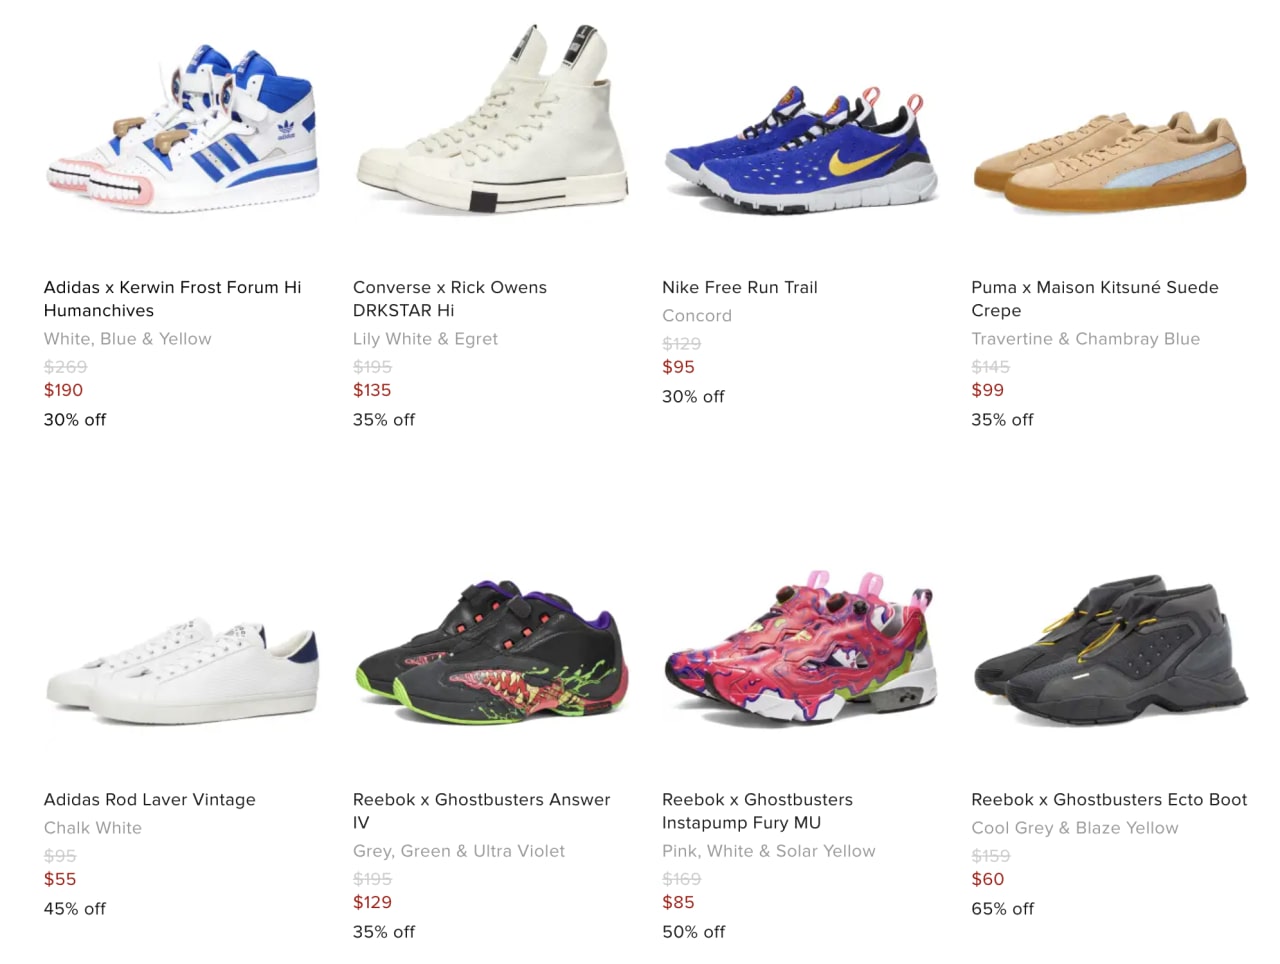 Zijdelings Microprocessor God 15 Sneaker Stores Online With the Best Sale Sections | Complex